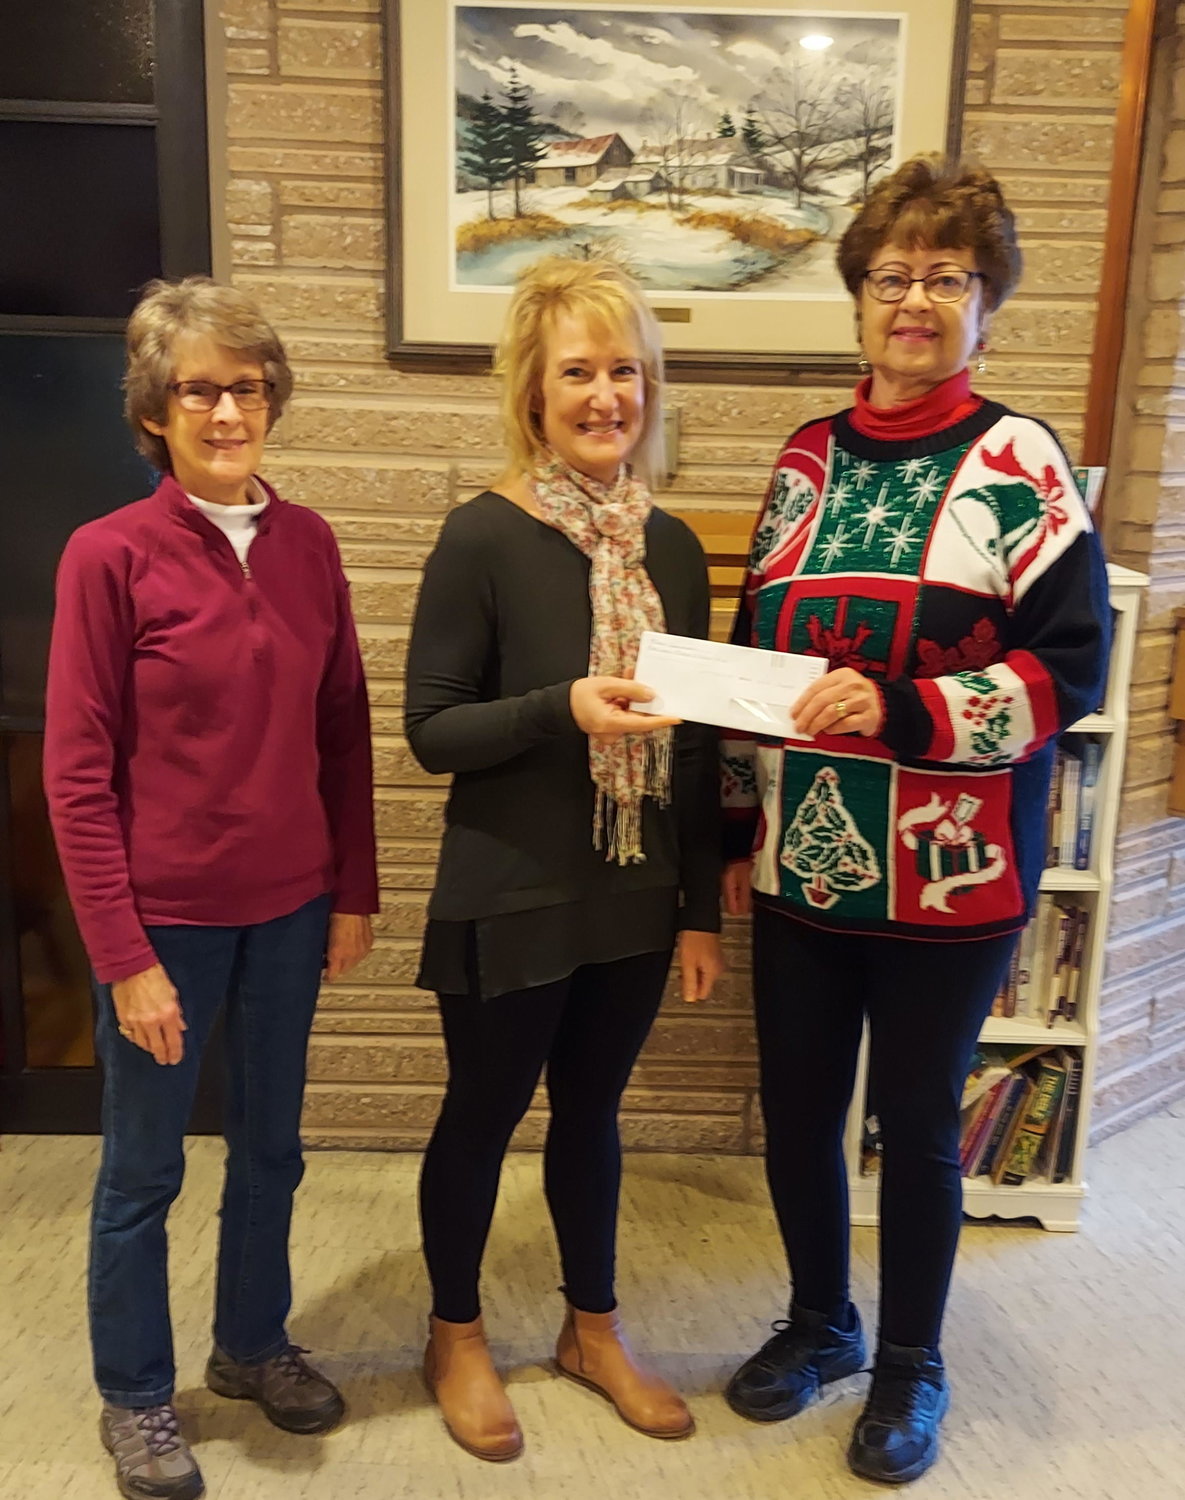 The Mohican Model A Ford Club has announced the organization has made three recent charitable donations. From left: Secretary and Treasurer Suzanne Getman; Chairperson Mary Beth Plourde; and Mabel Silliman, Mohican Model A Ford Club.